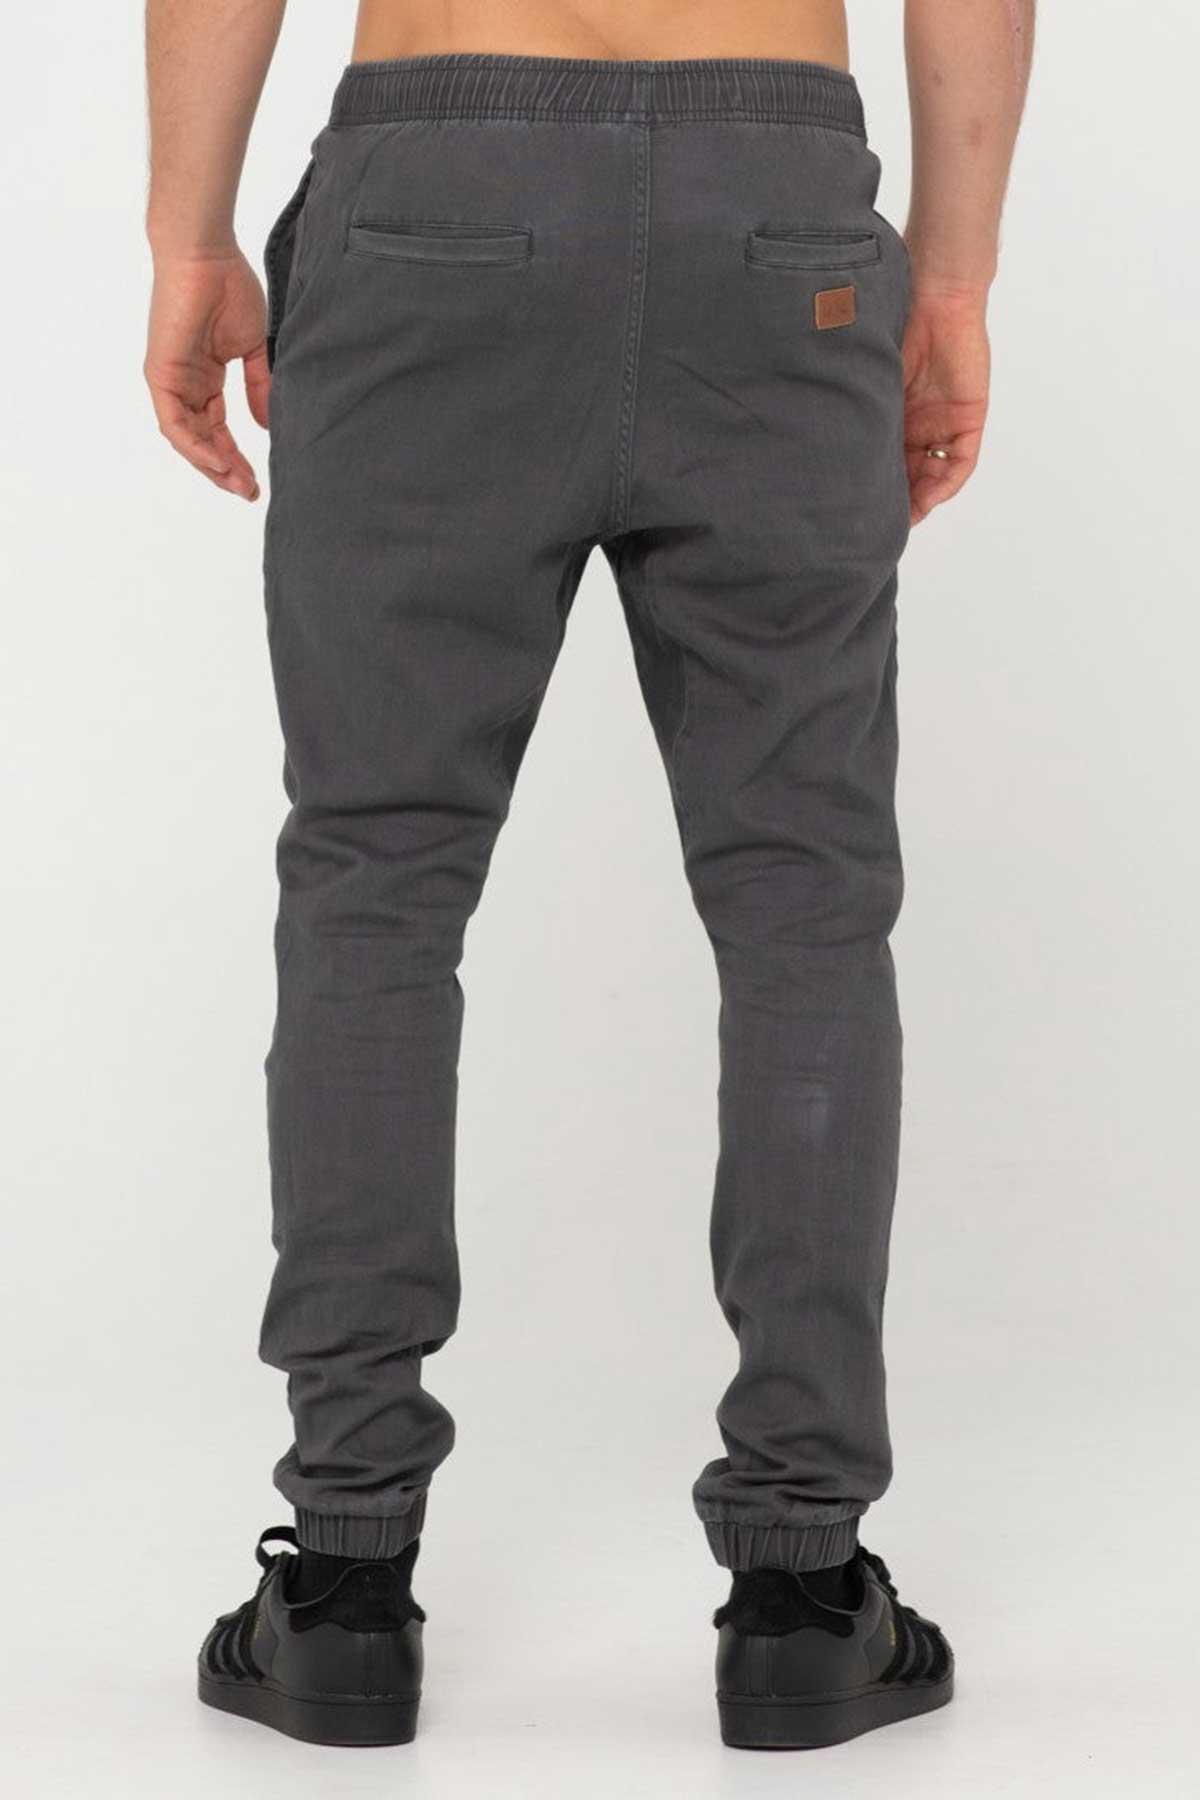 Rusty Mens Elastic Pant Hook Out back view